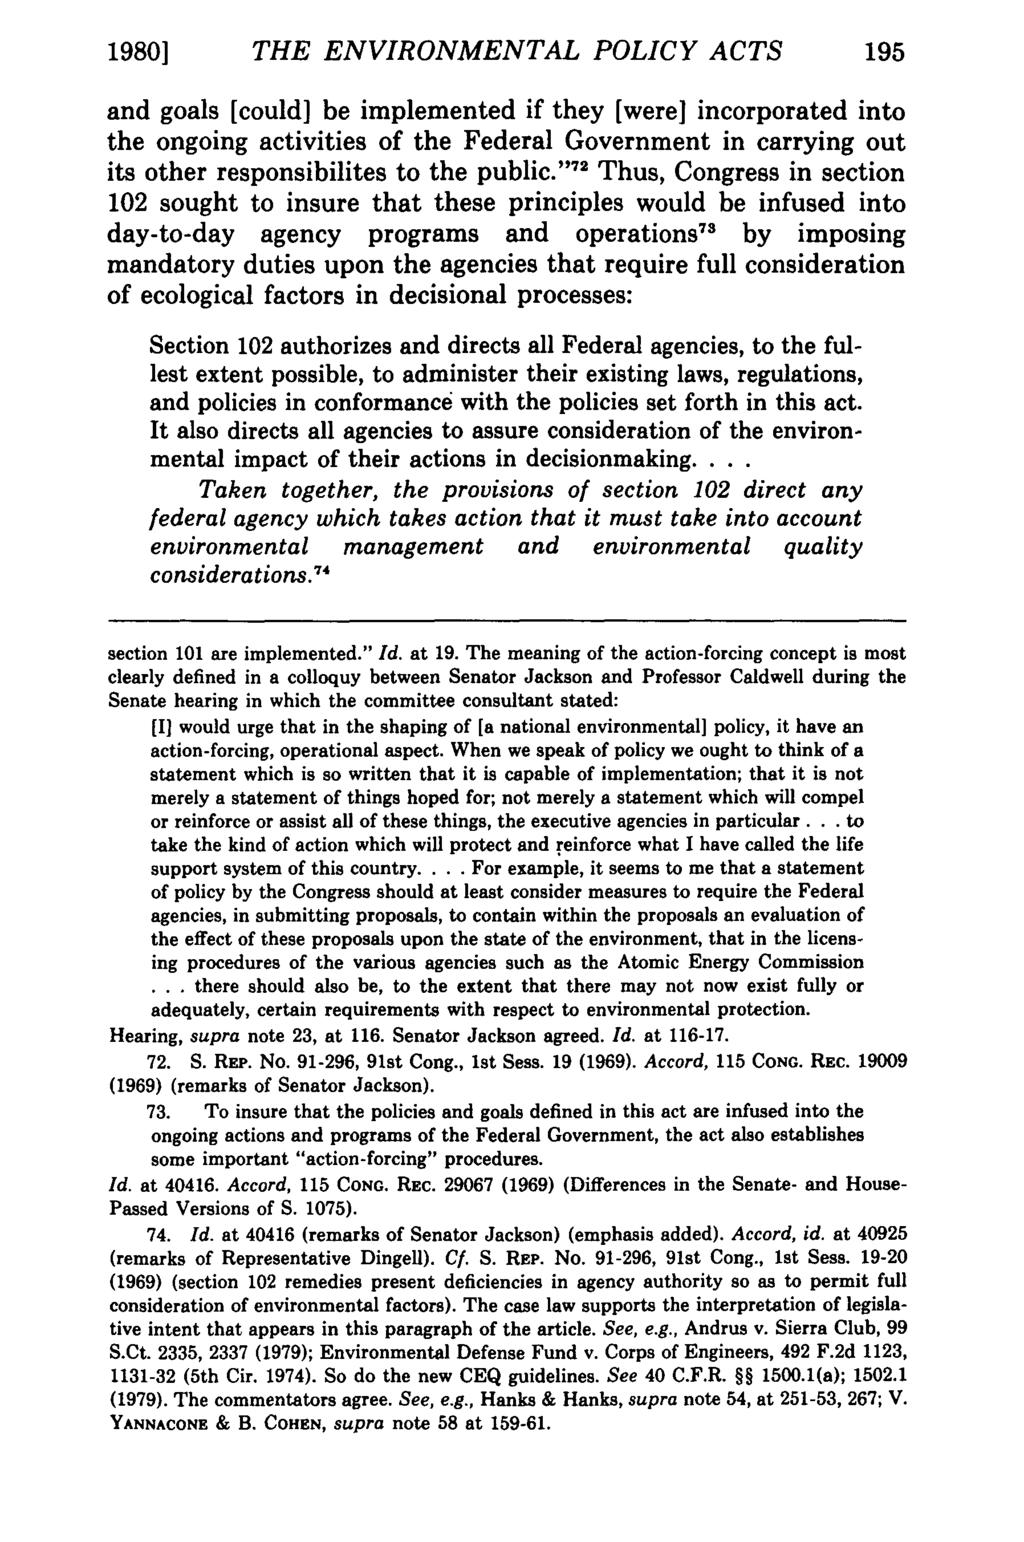 1980] THE ENVIRONMENT AL POLICY ACTS 195 and goals [could] be implemented if they [were] incorporated into the ongoing activities of the Federal Government in carrying out its other responsibilites